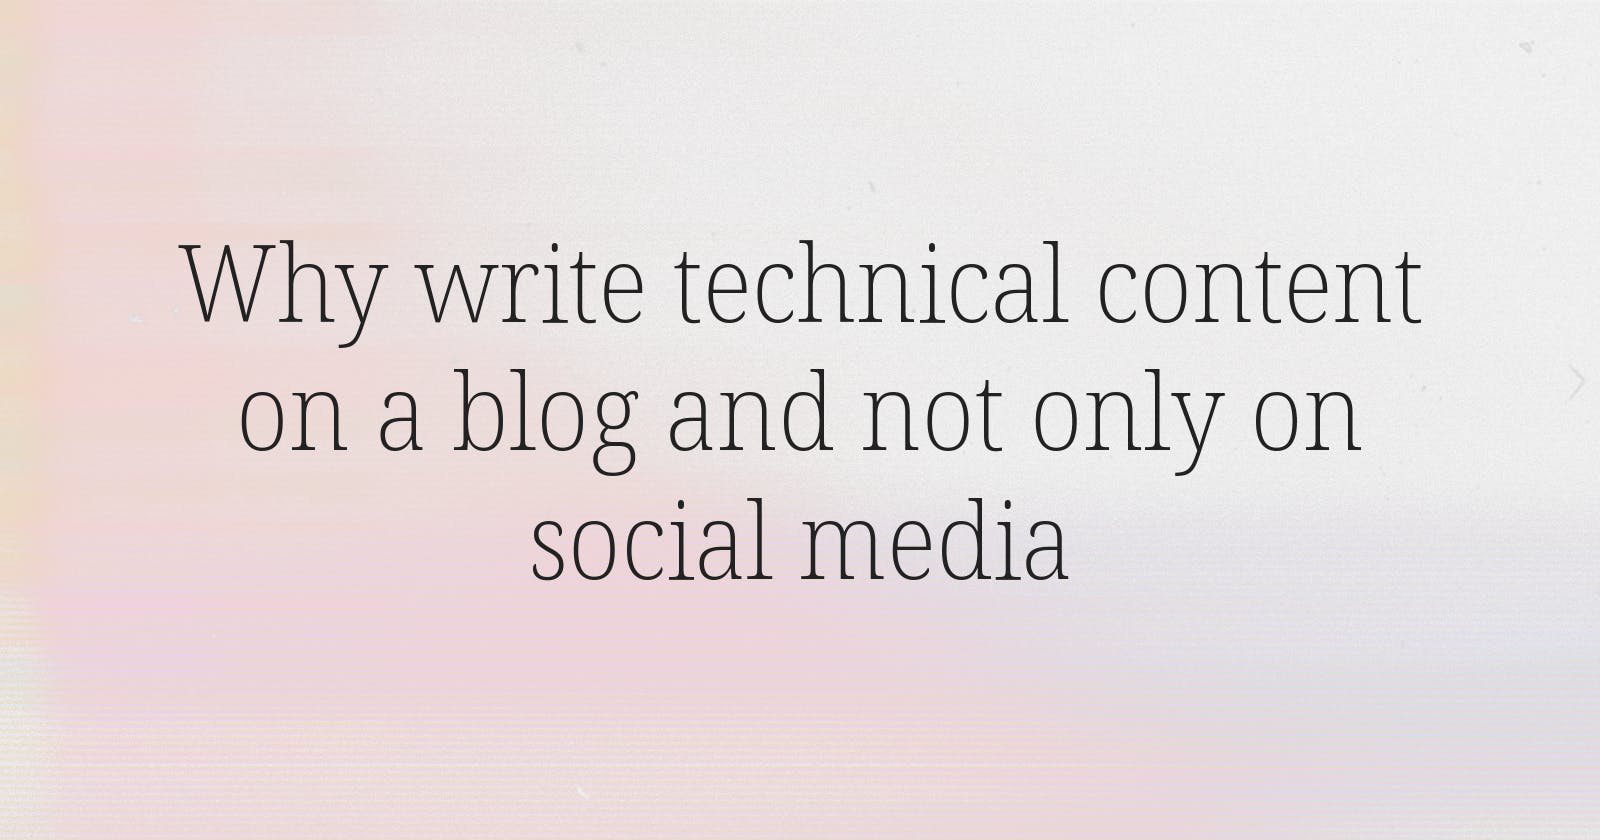 Why write technical content on a blog and not only on social media